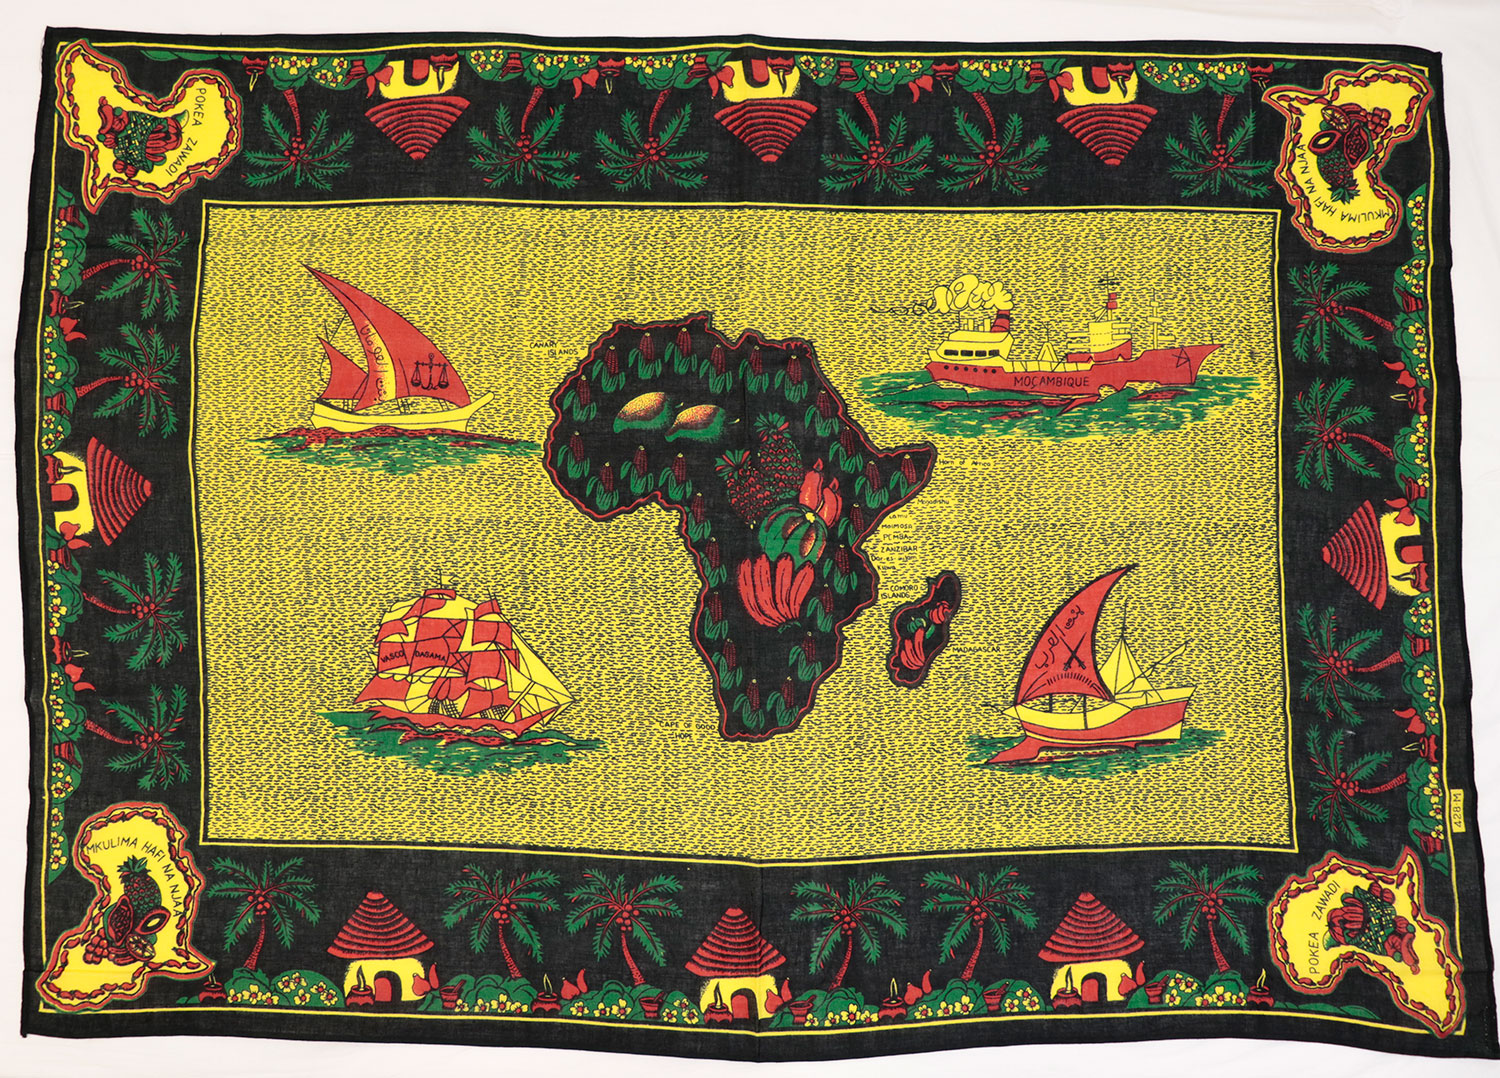 Capulana featuring a rectangular design representing Mozambican sea faring trade with a map of Africa filled with fruits in the centre: Africa, Southern Africa, Mozambique, 1994-2000.